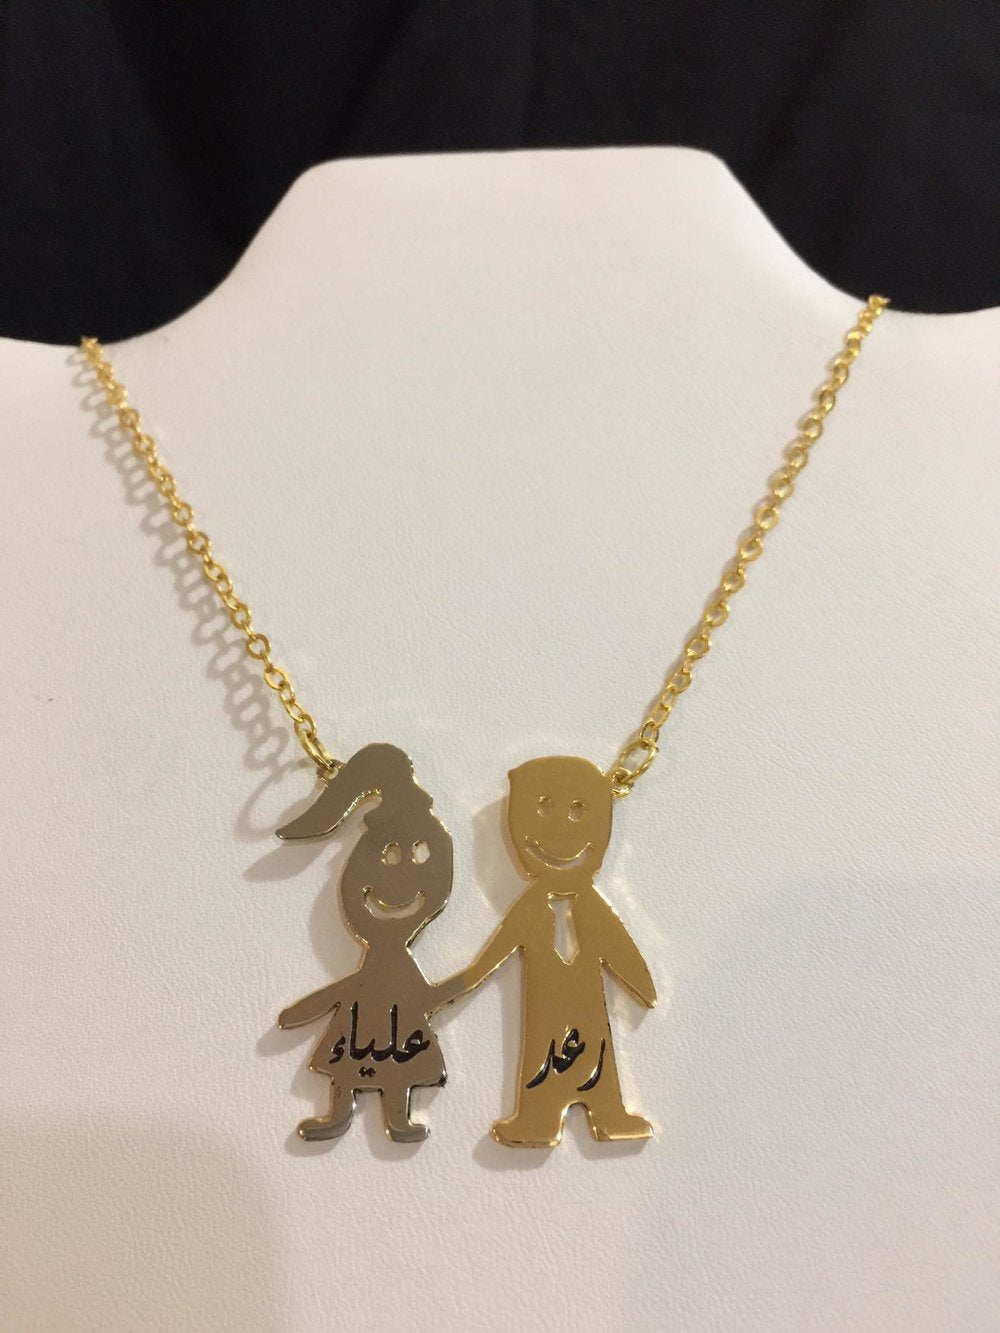 2 name necklace - Couple name picture